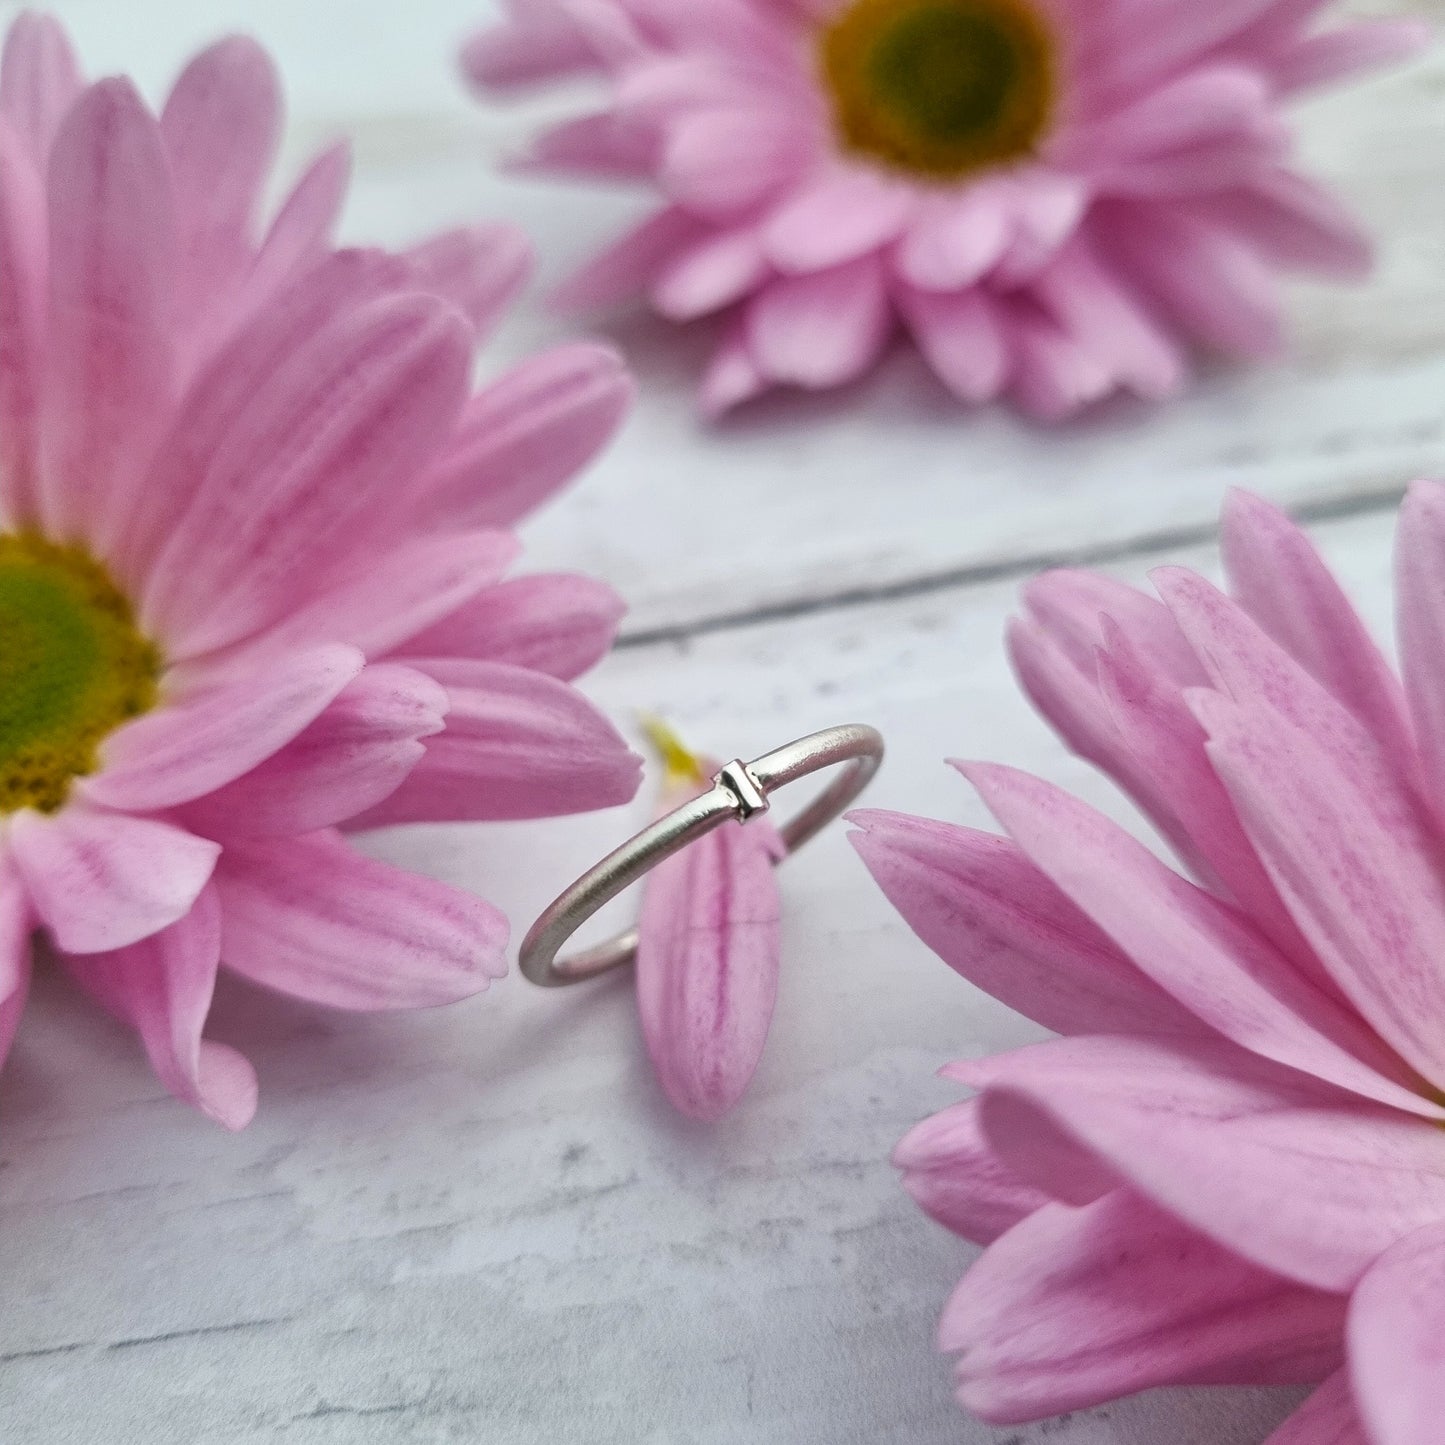 Frost & Shine | Silver and Gold stacking rings